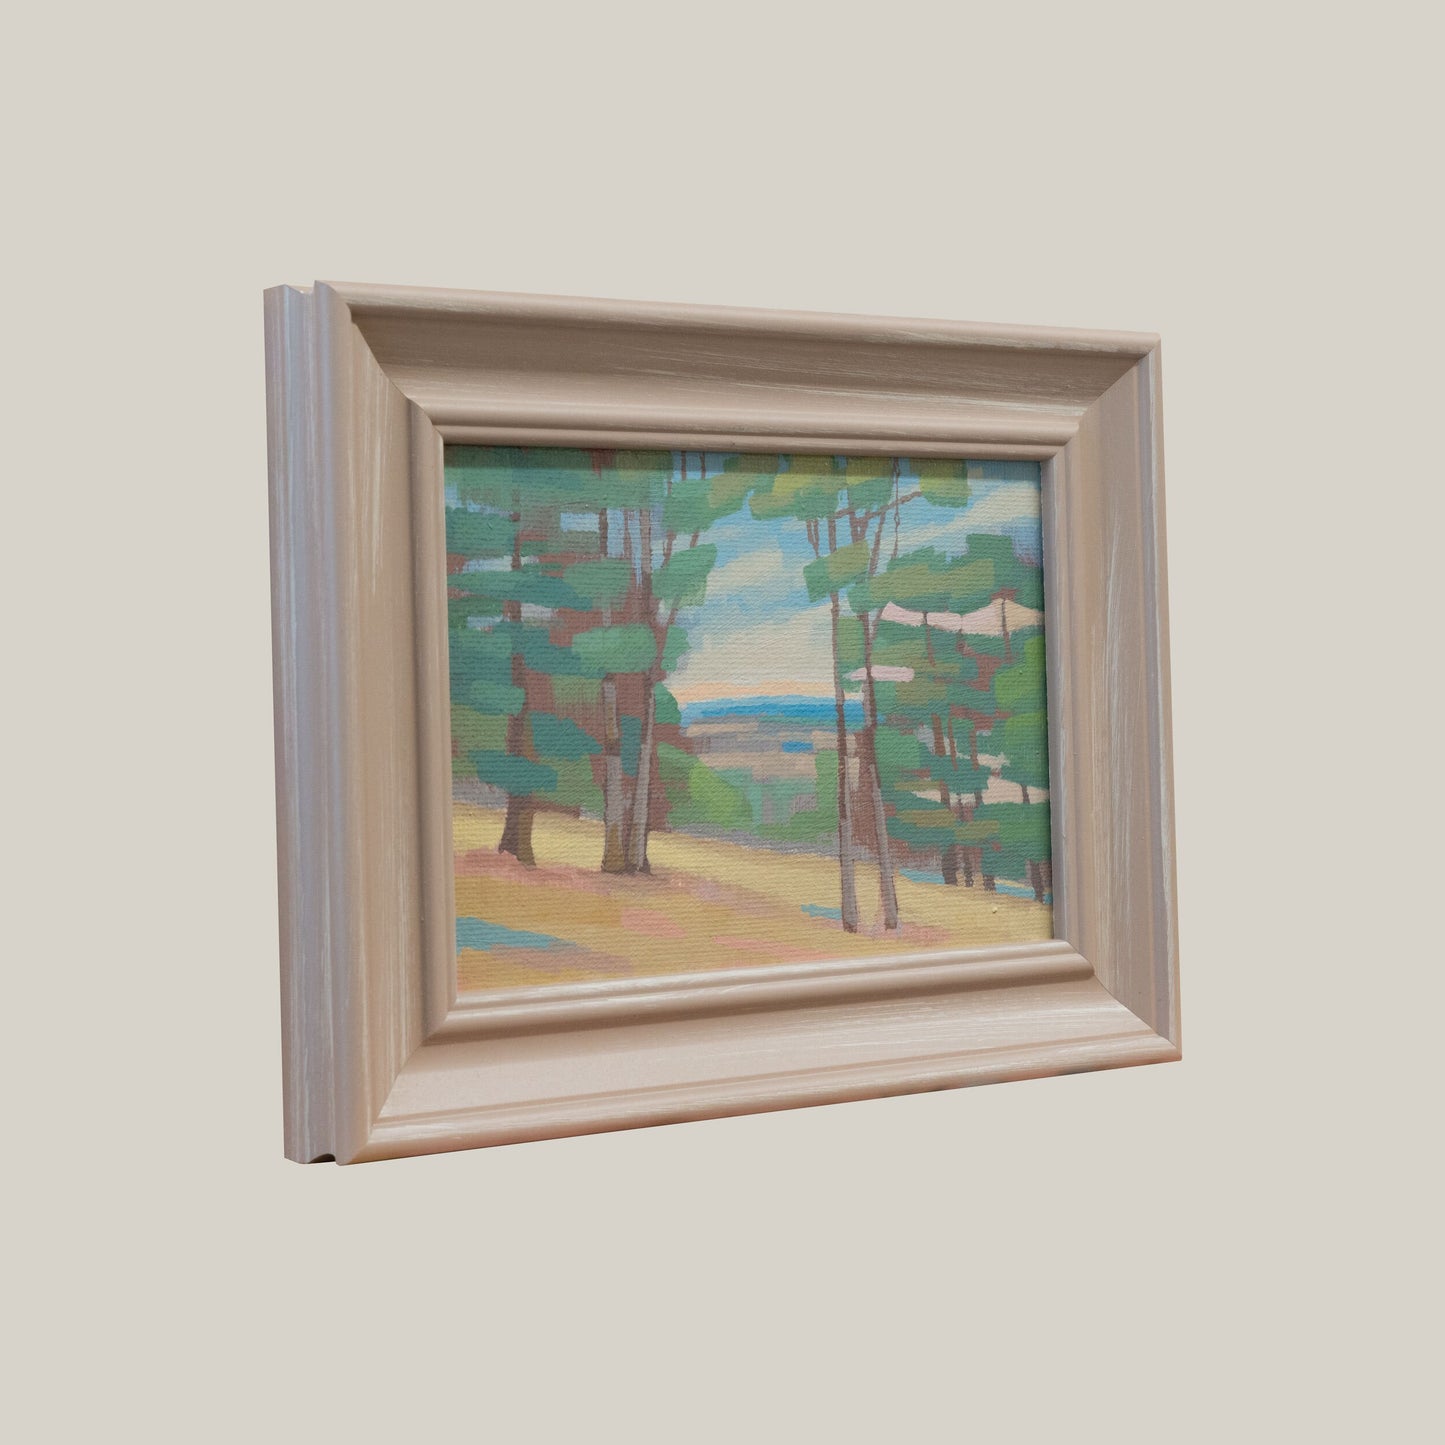 Original painting - "Foresight" - hand painted - acrylic painting - 10x15 cm - landscape picture - unique piece - with frame